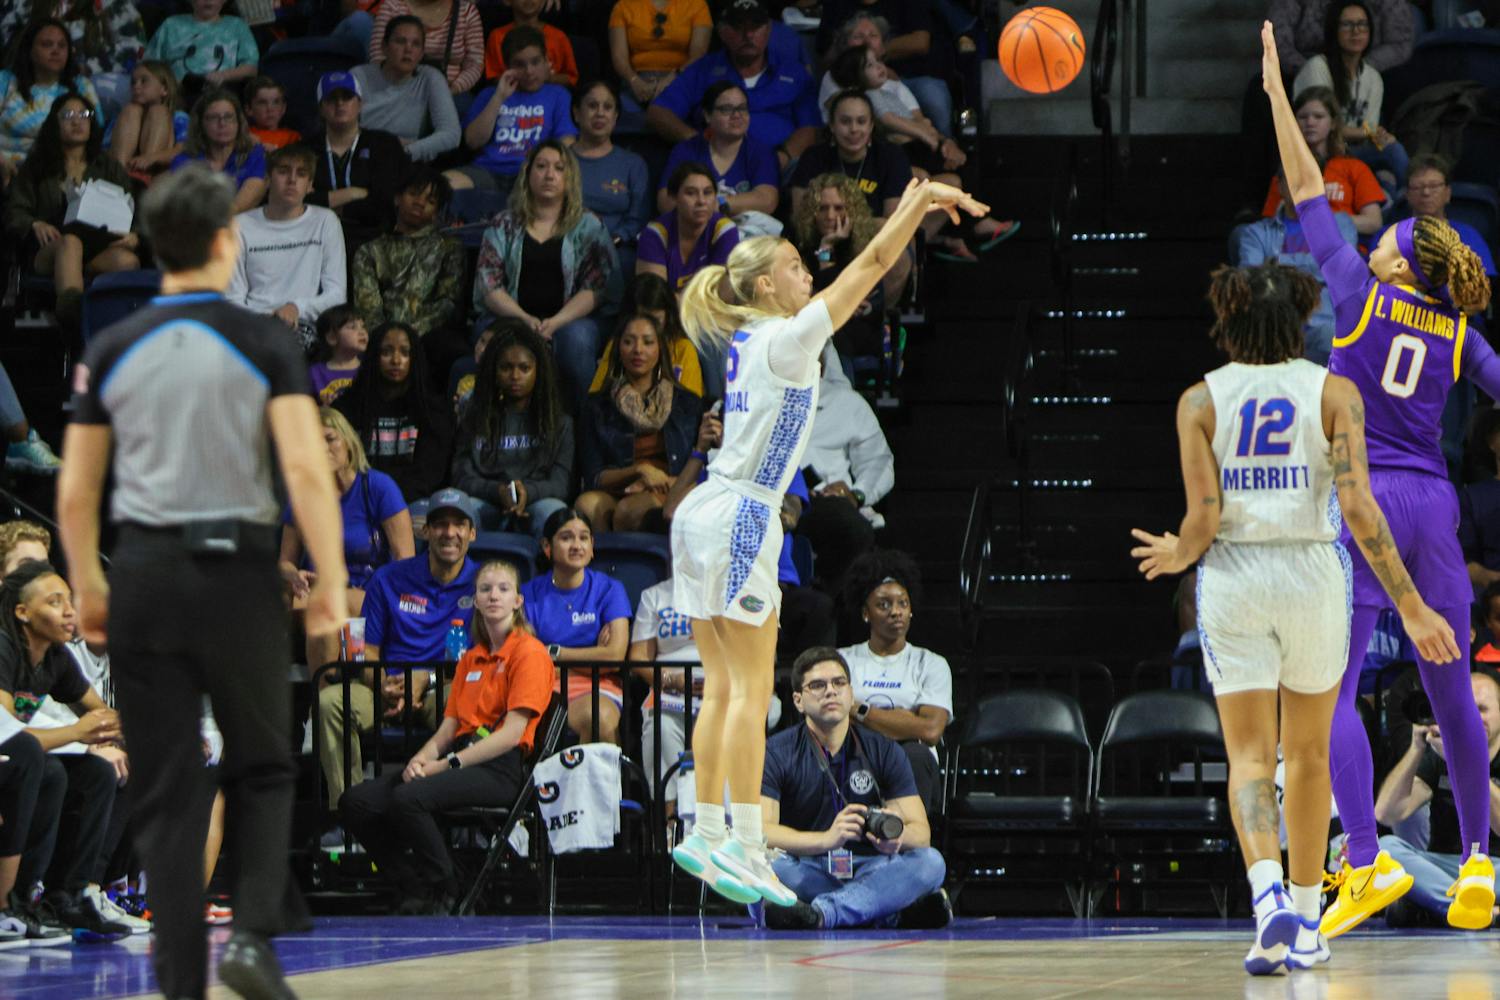 Florida guard Alberte Rimdal shoots the ball over a defender’s outstretched arm in the Gators' 90-79 loss to the Louisiana State Tigers Sunday, Feb. 19, 2023.